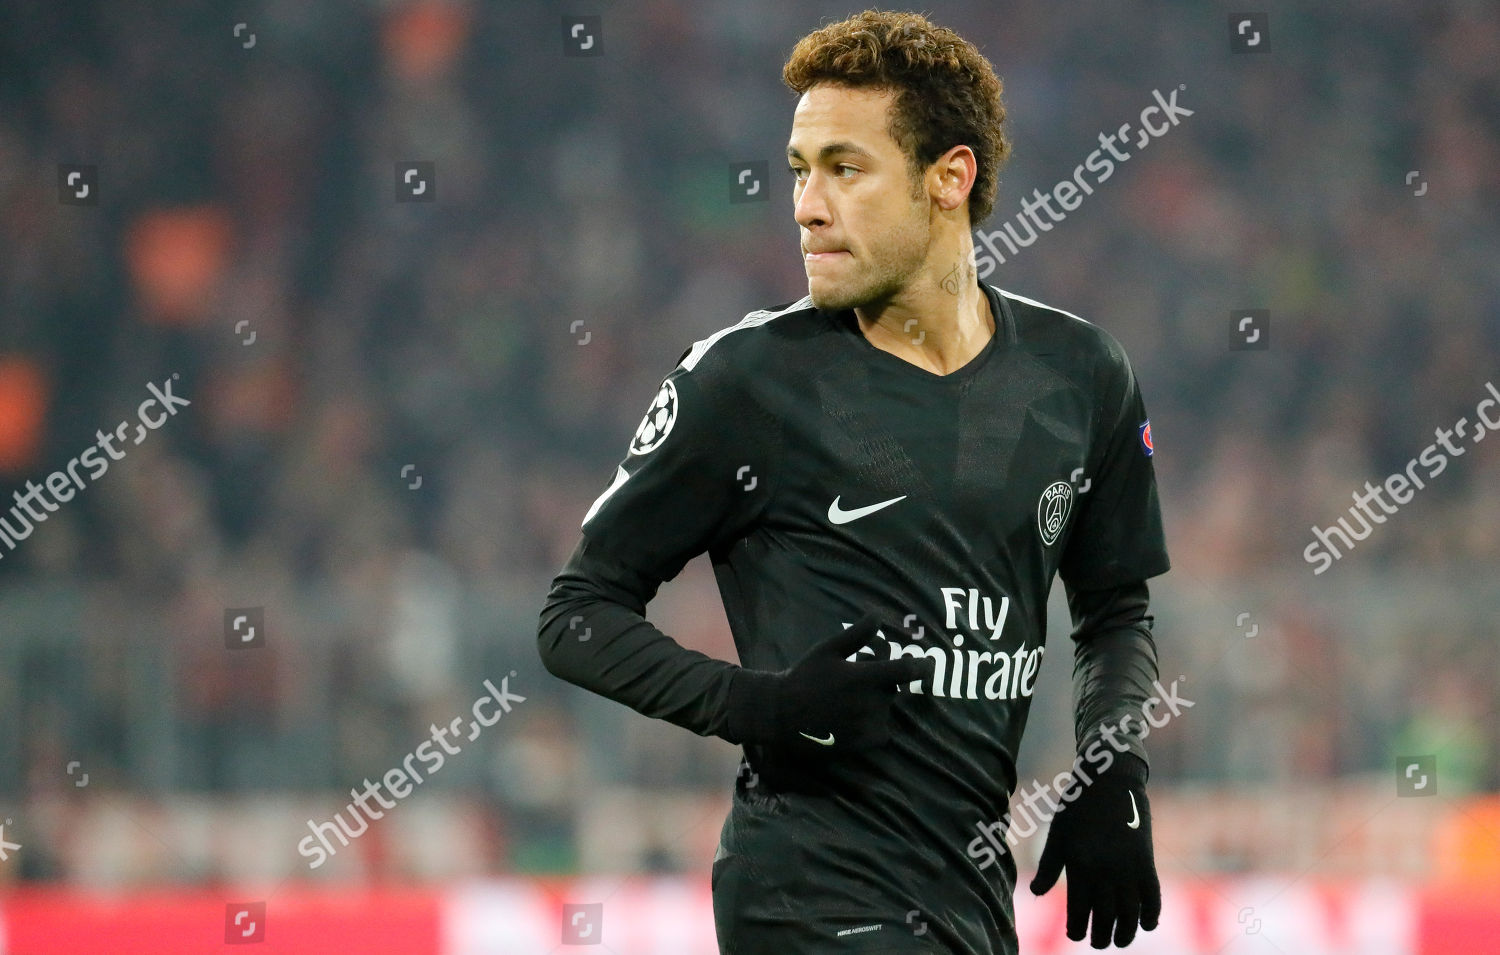 Pariss Neymar Reacts During Uefa Champions League Editorial Stock Photo Stock Image Shutterstock